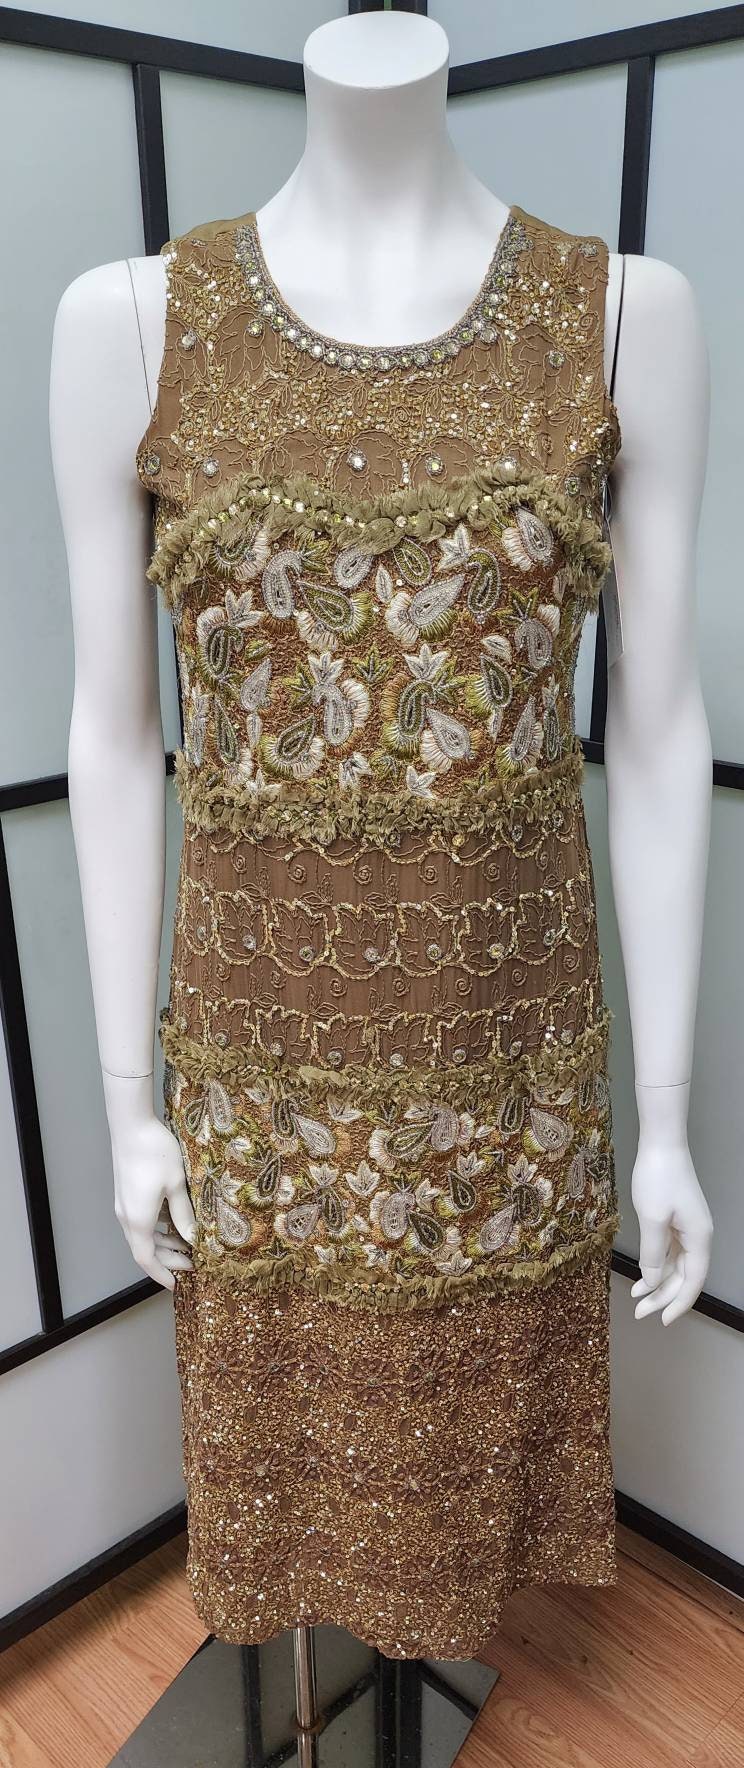 Vintage Indian Dress 1990s Brown Silk Bead Jewel Sequin Paisley Embroidered Tank Dress India Boho S